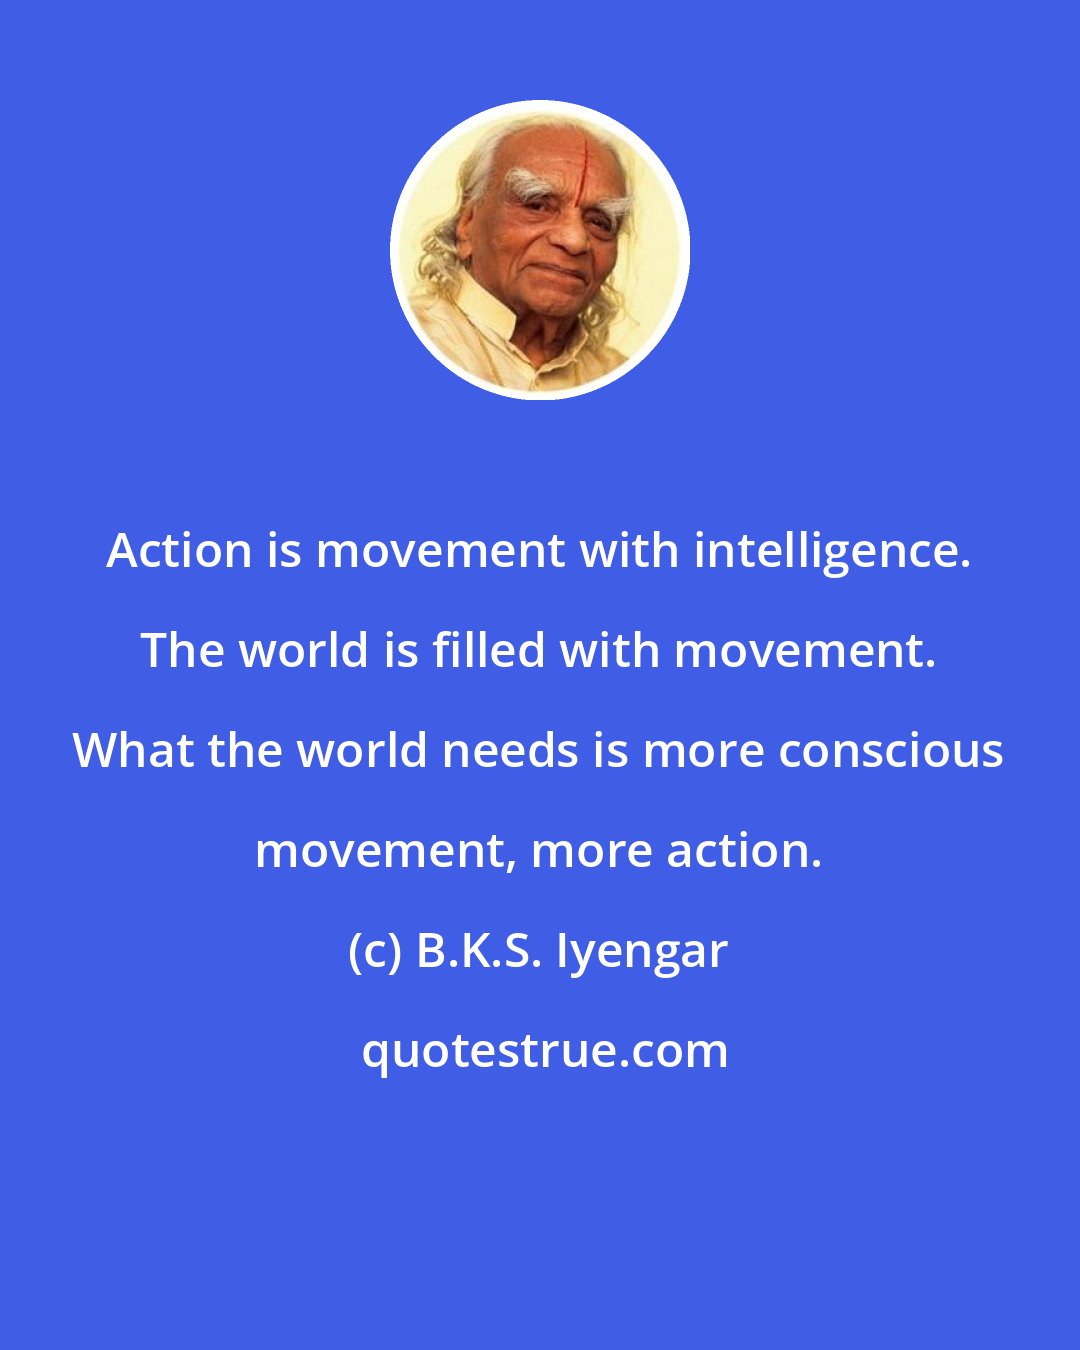 B.K.S. Iyengar: Action is movement with intelligence. The world is filled with movement. What the world needs is more conscious movement, more action.